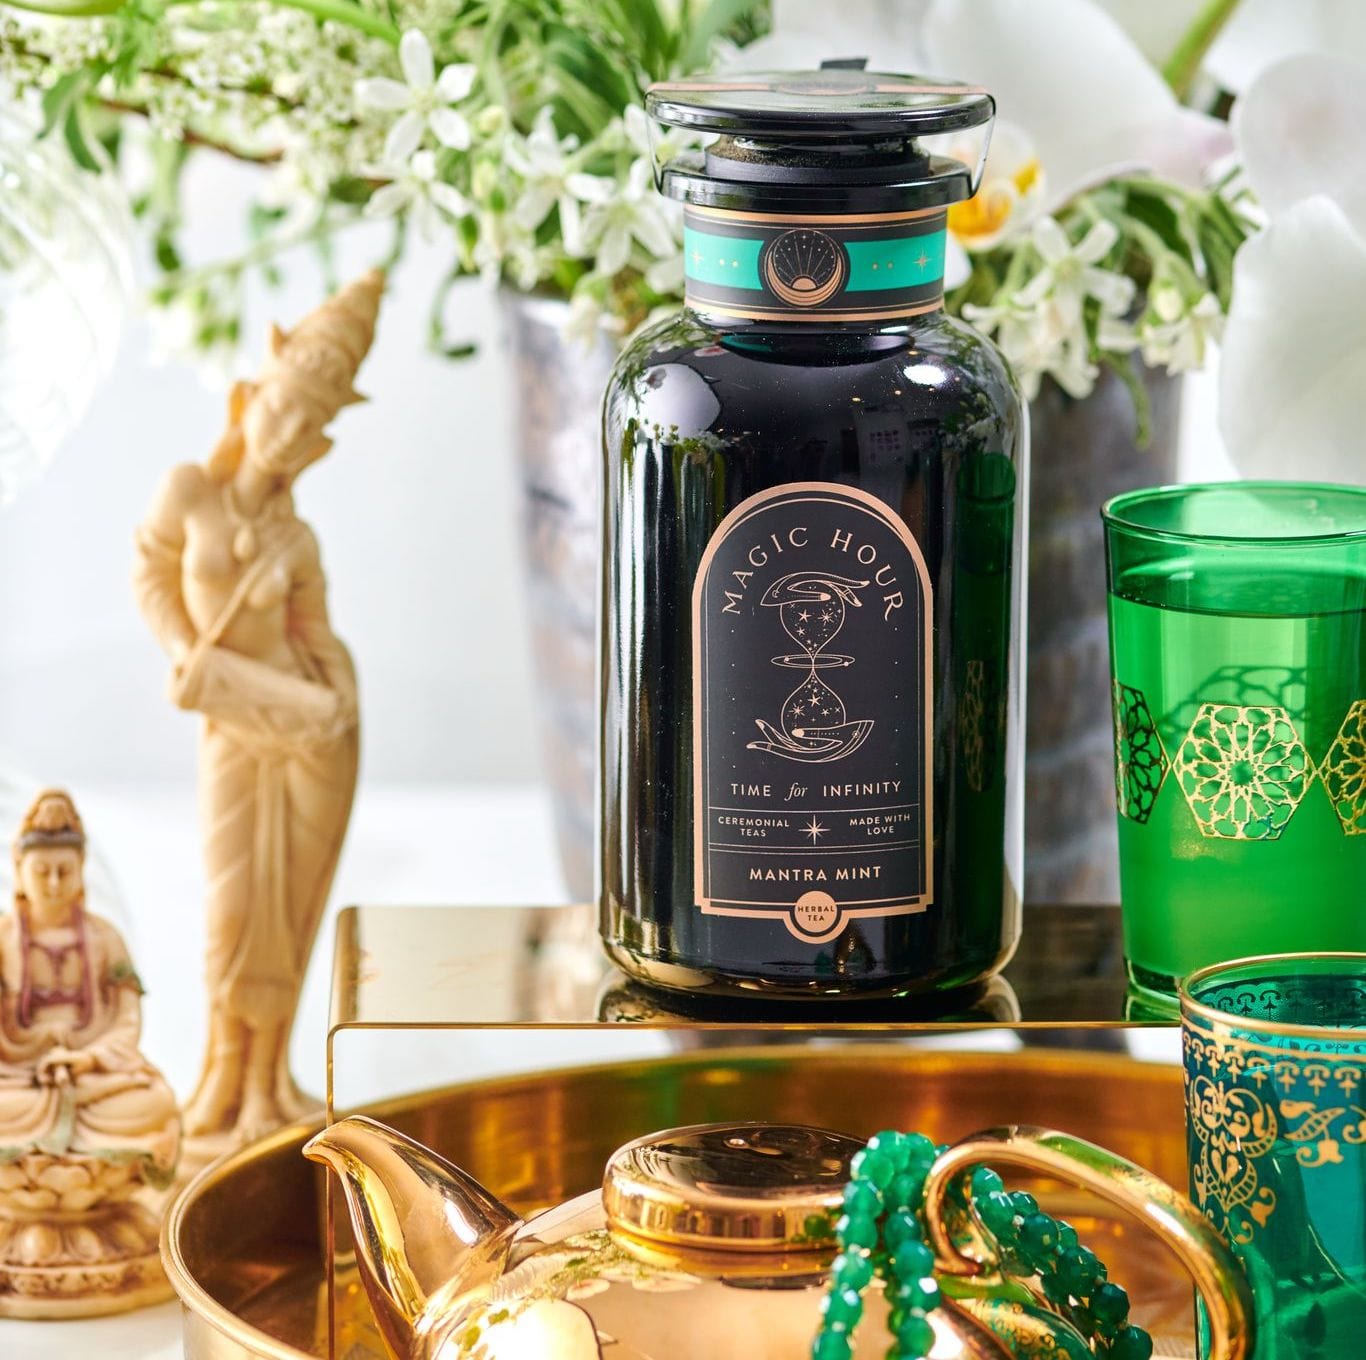 A teal and gold-themed tea setup featuring a black jar of "Mantra Mint™ Herbal Tea" by Club Magic Hour with an intricate label, surrounded by vibrant green glasses, a golden teapot, beads, and statues. It's set on a reflective golden surface with flowers in the background.